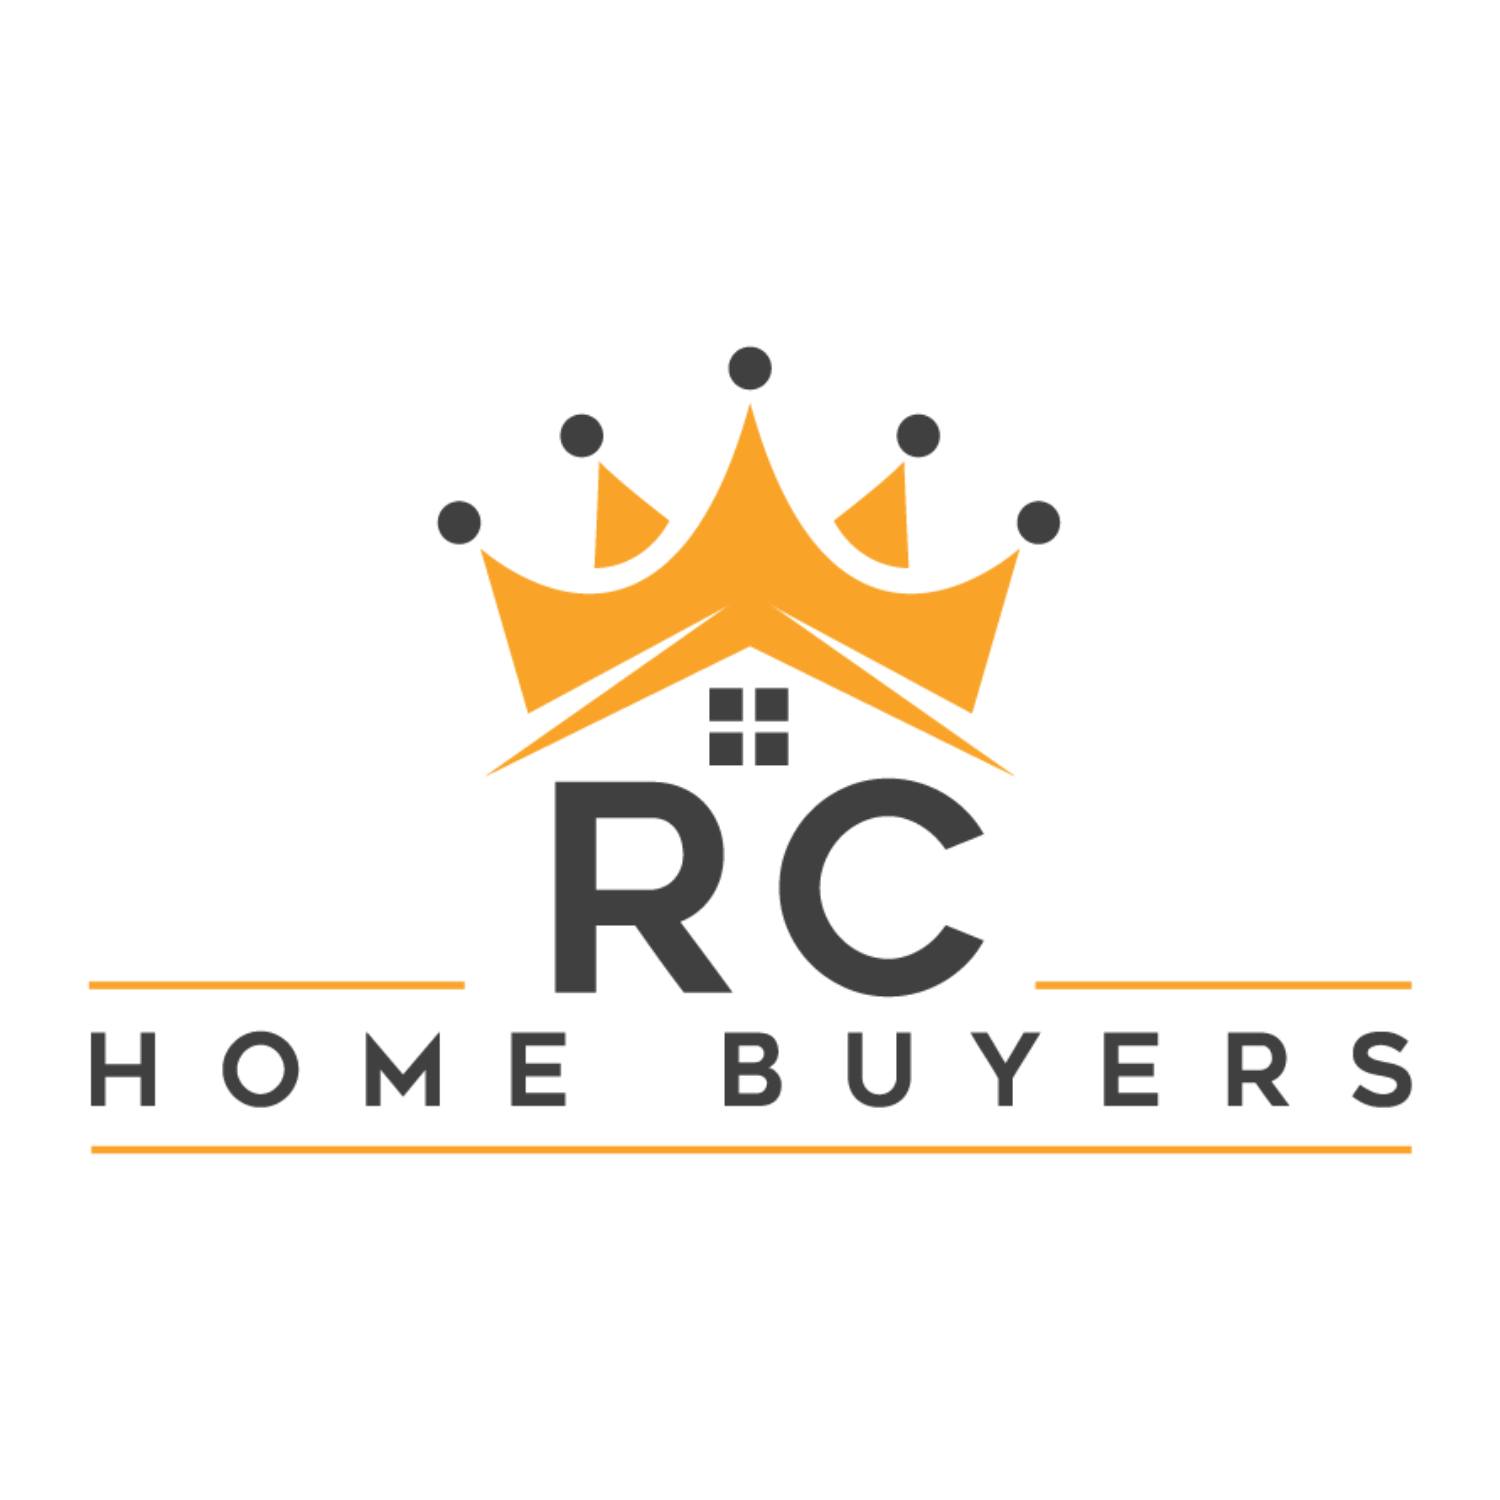 Business logo of RC Home Buyers